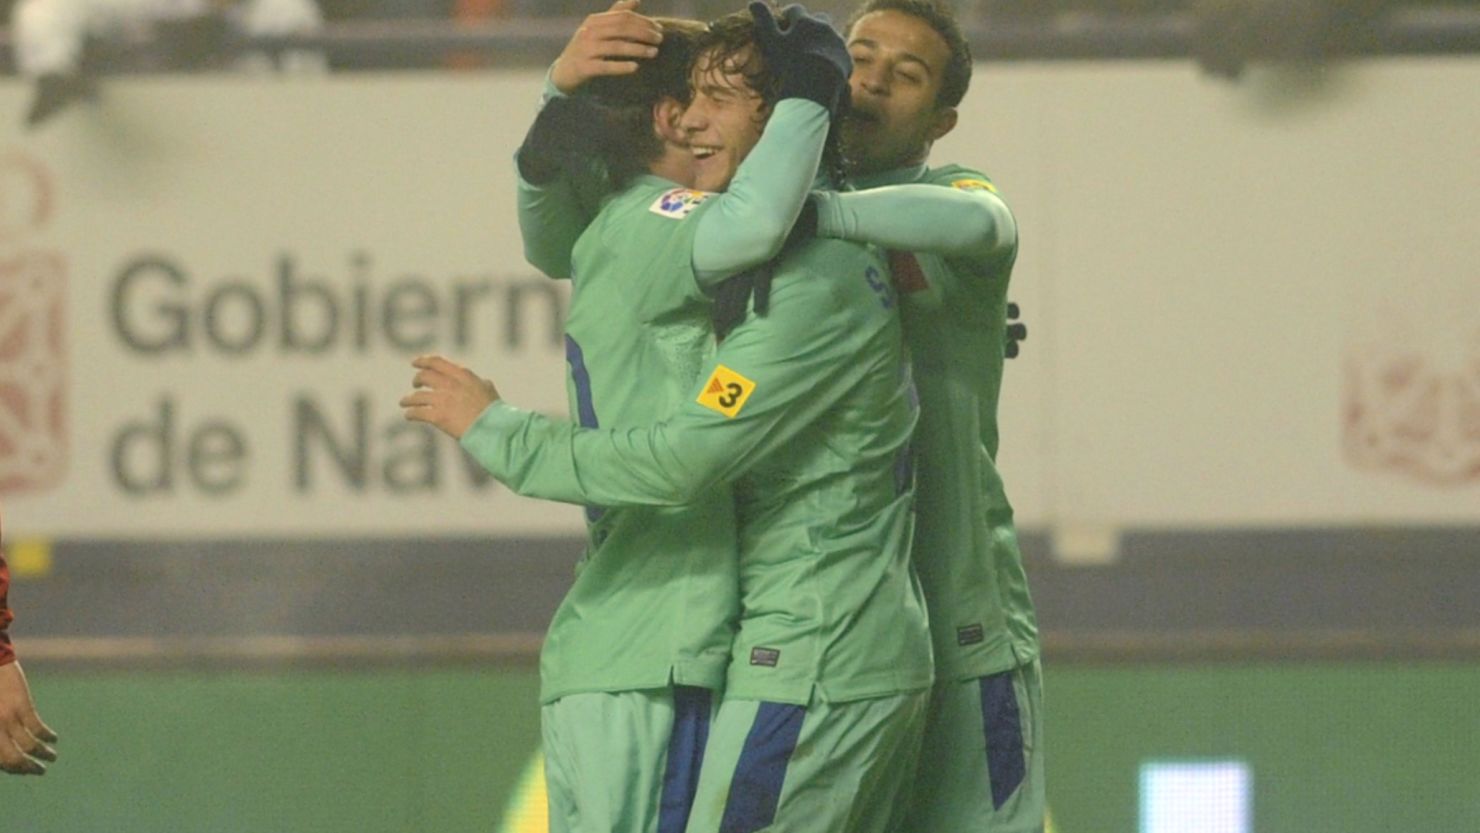 Barcelona players celebrate their winning goal over Osasuna on a foggy evening in Pamplona.